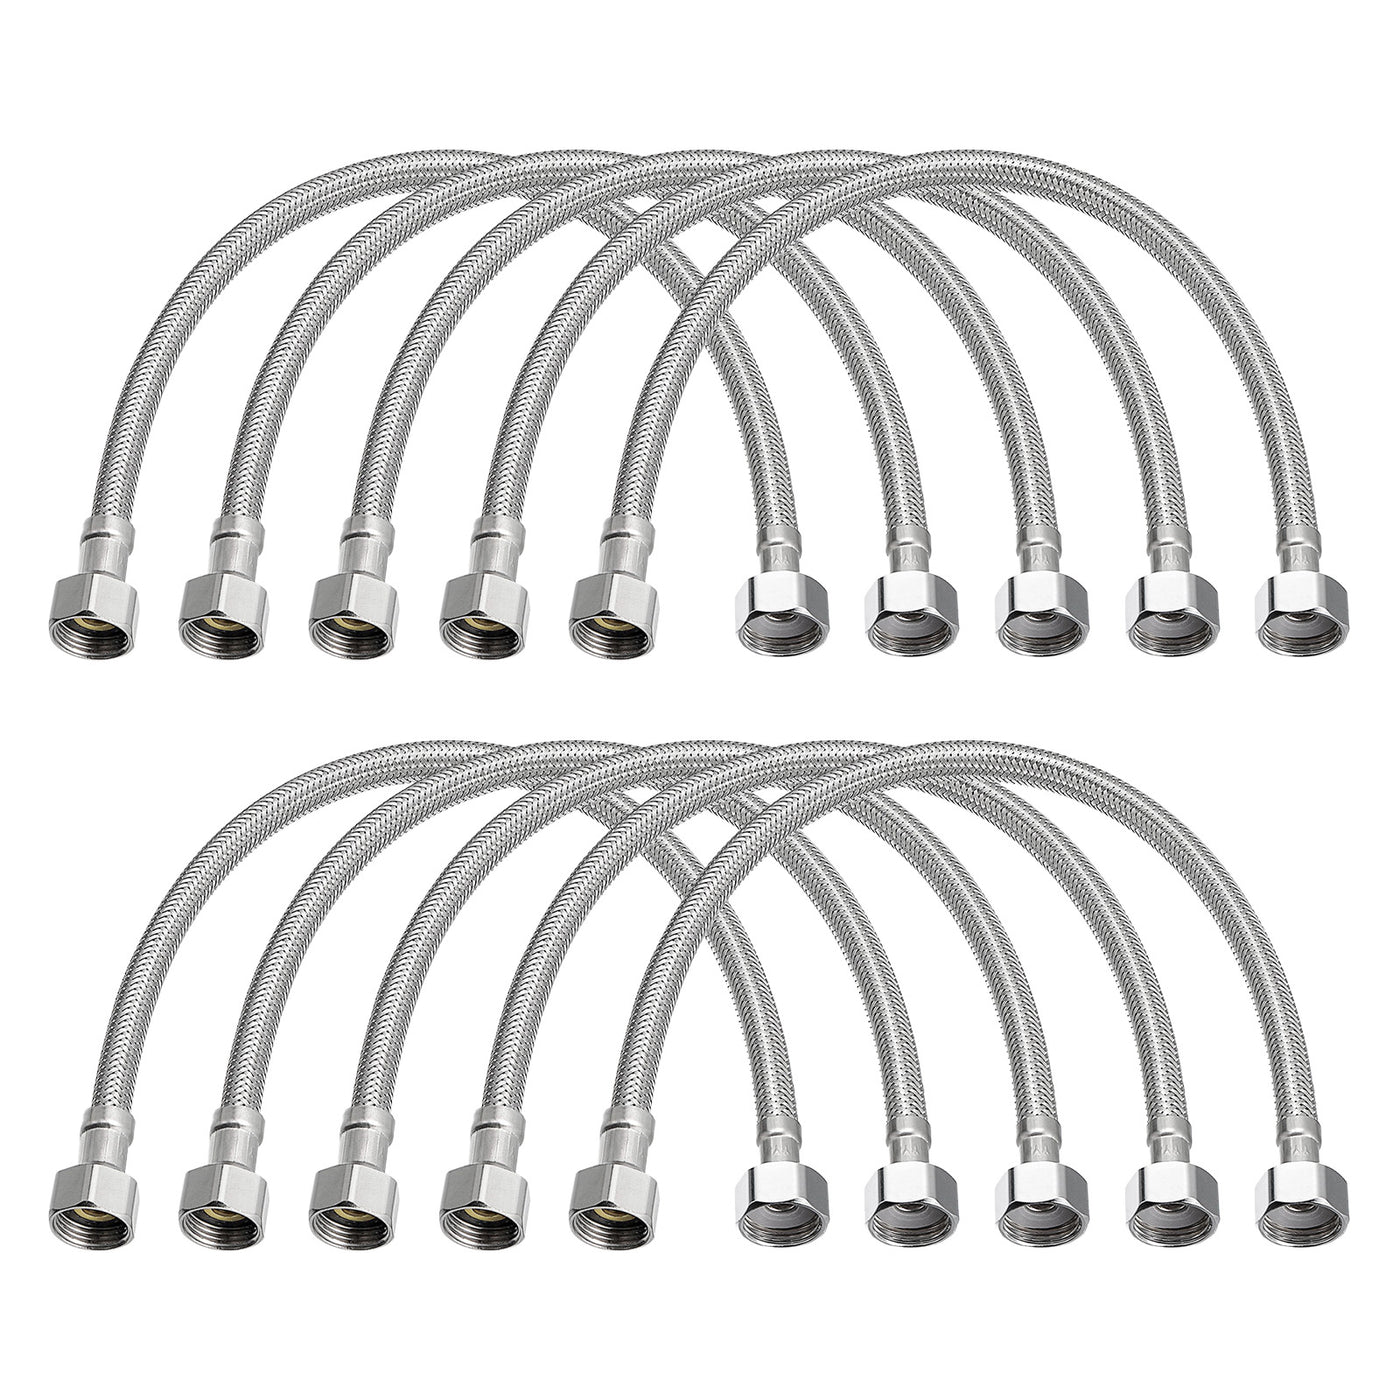 uxcell Uxcell 16 Inch Long Faucet Supply Line Connector, 10pcs G3/8 Female Compression Thread x G1/2 Female Straight Thread 304 Stainless Steel Water Supply Hose